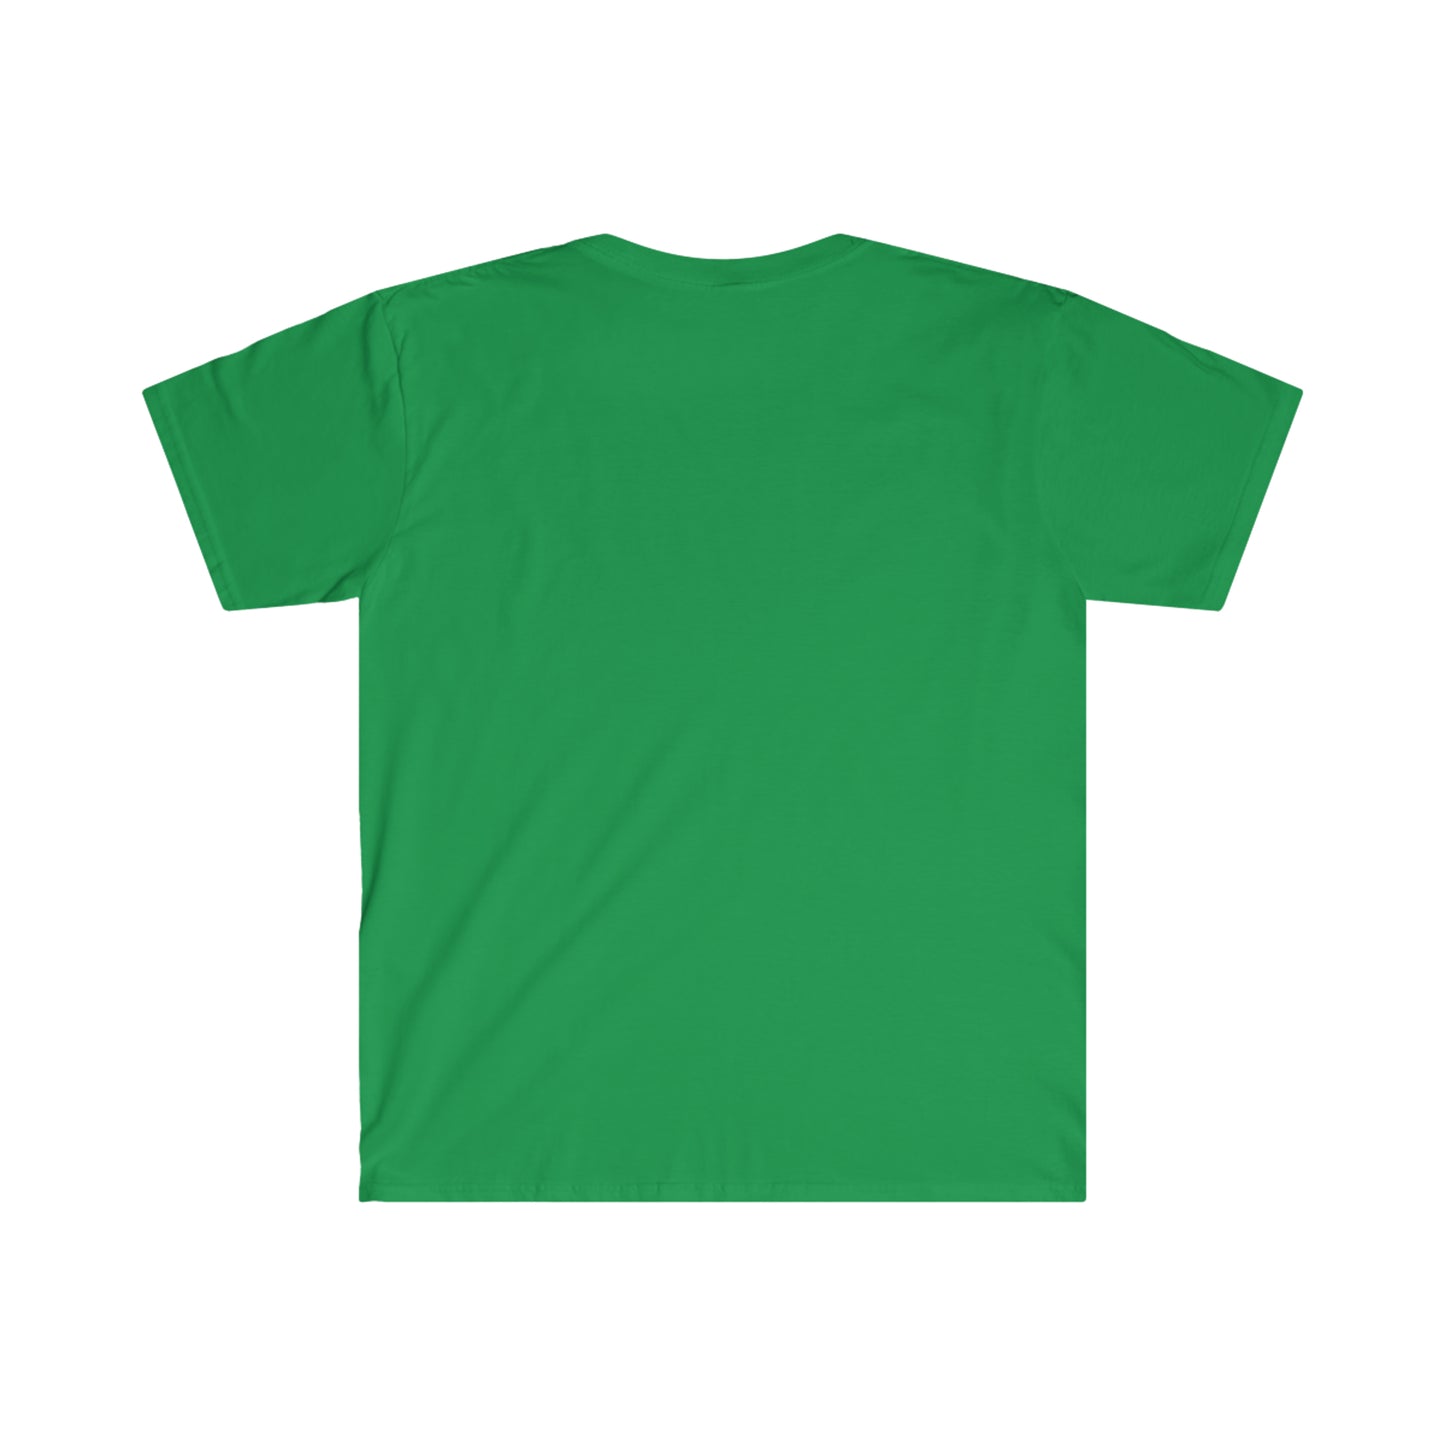 The Undecided Store Logo T shirt